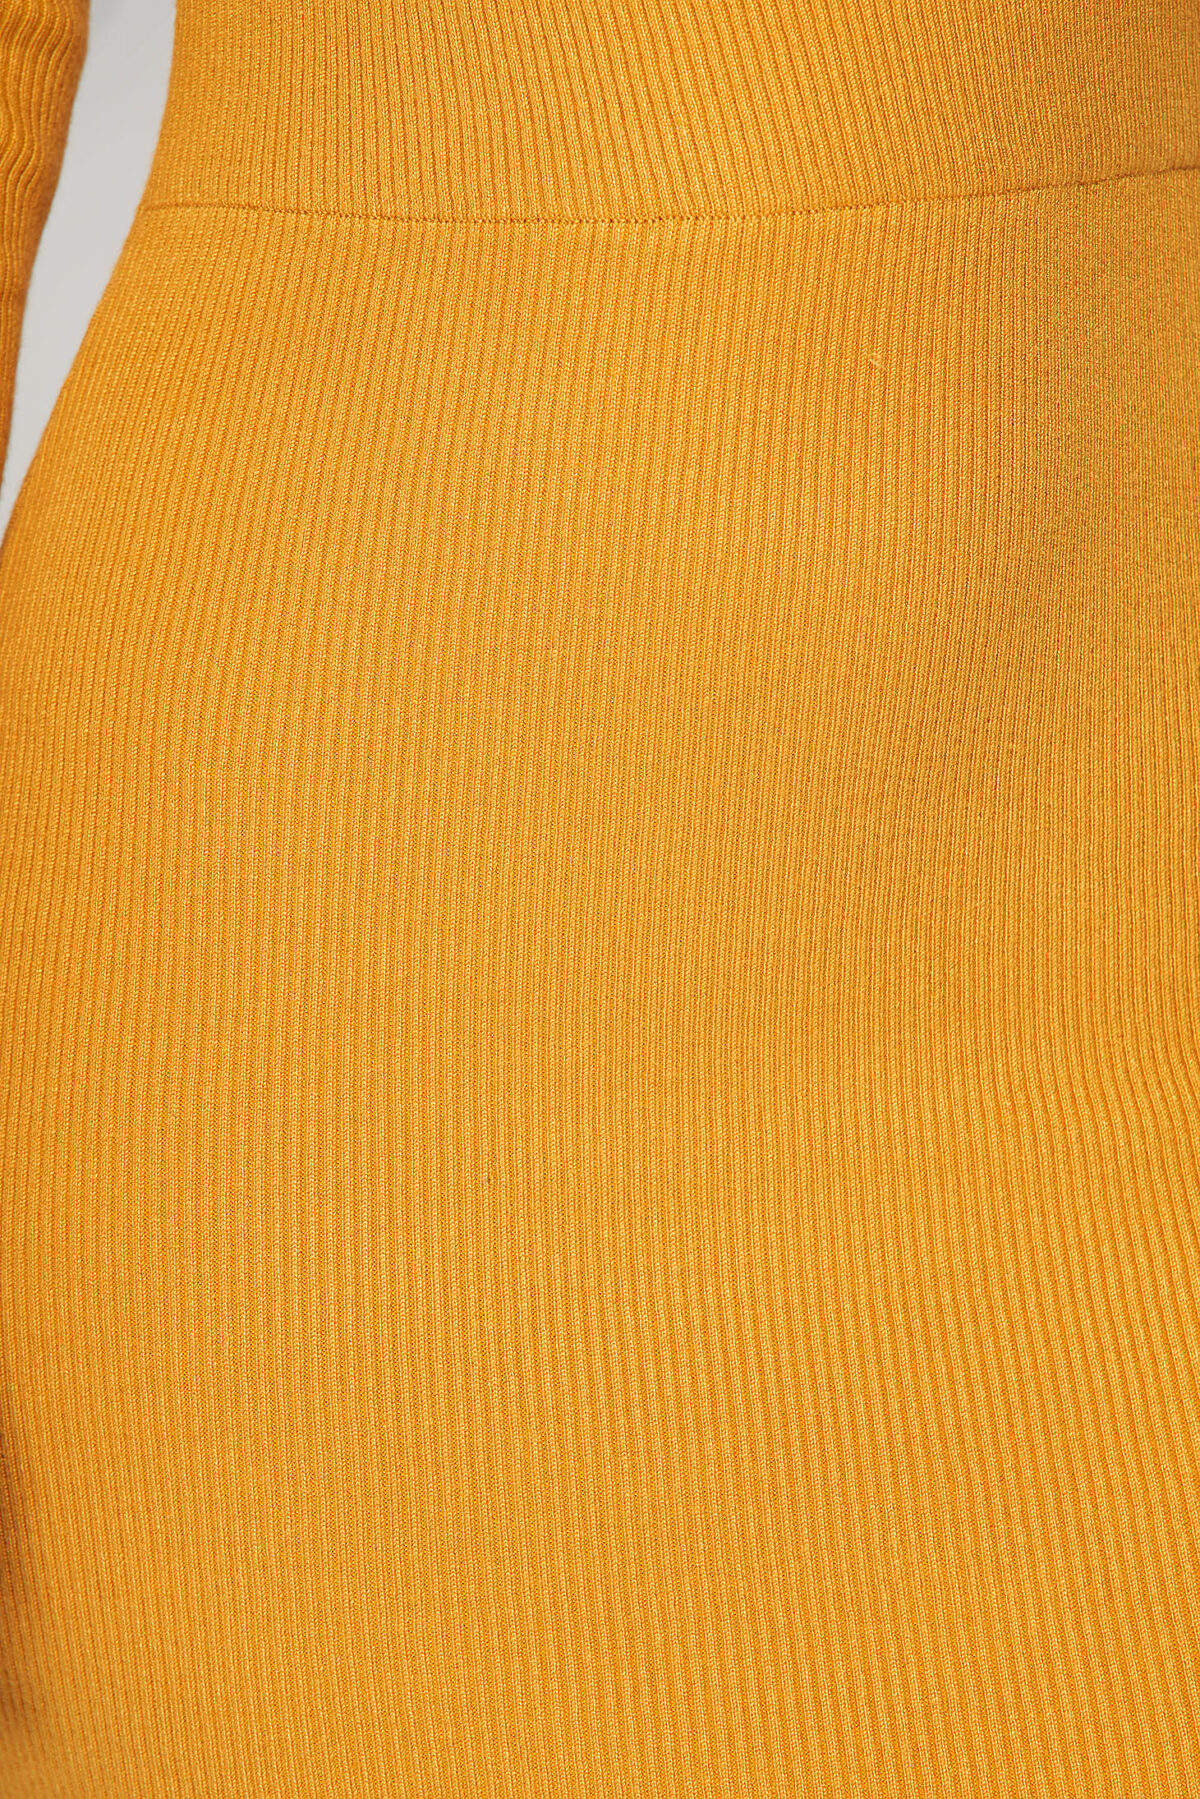 Mustard Dress Knitted From Elastic And Fine Fabric From Striped Fabric Pencil With Lace Details